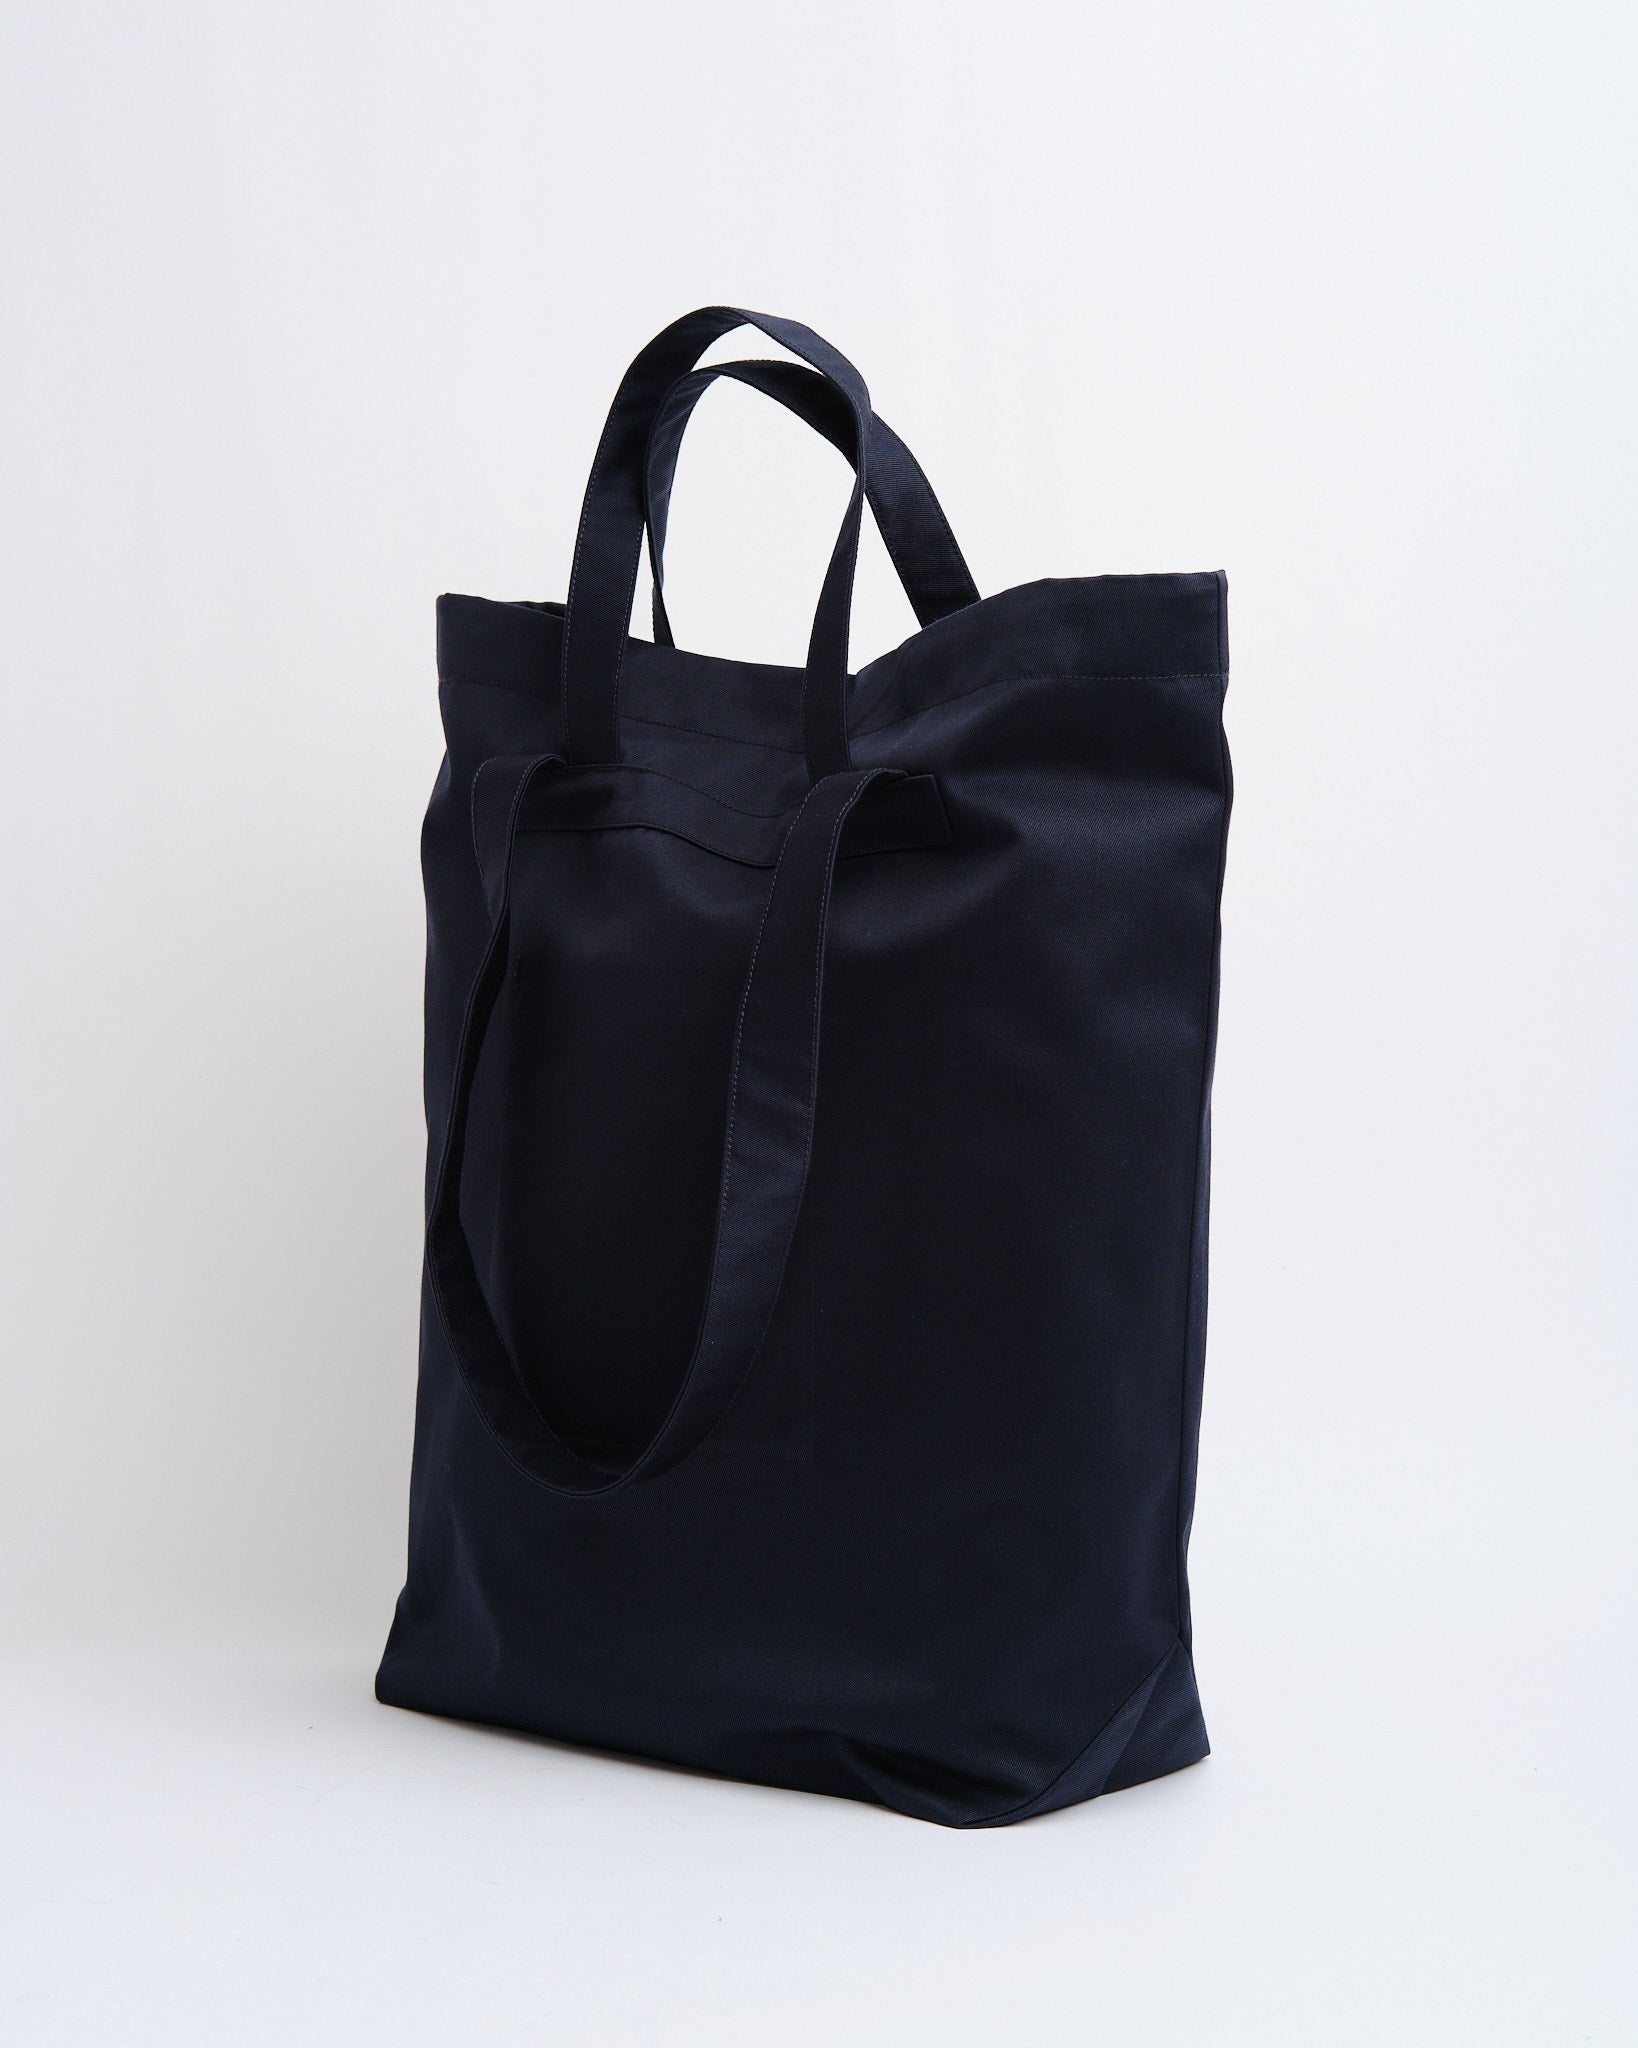 Chino Tote Bag Navy - Meadow